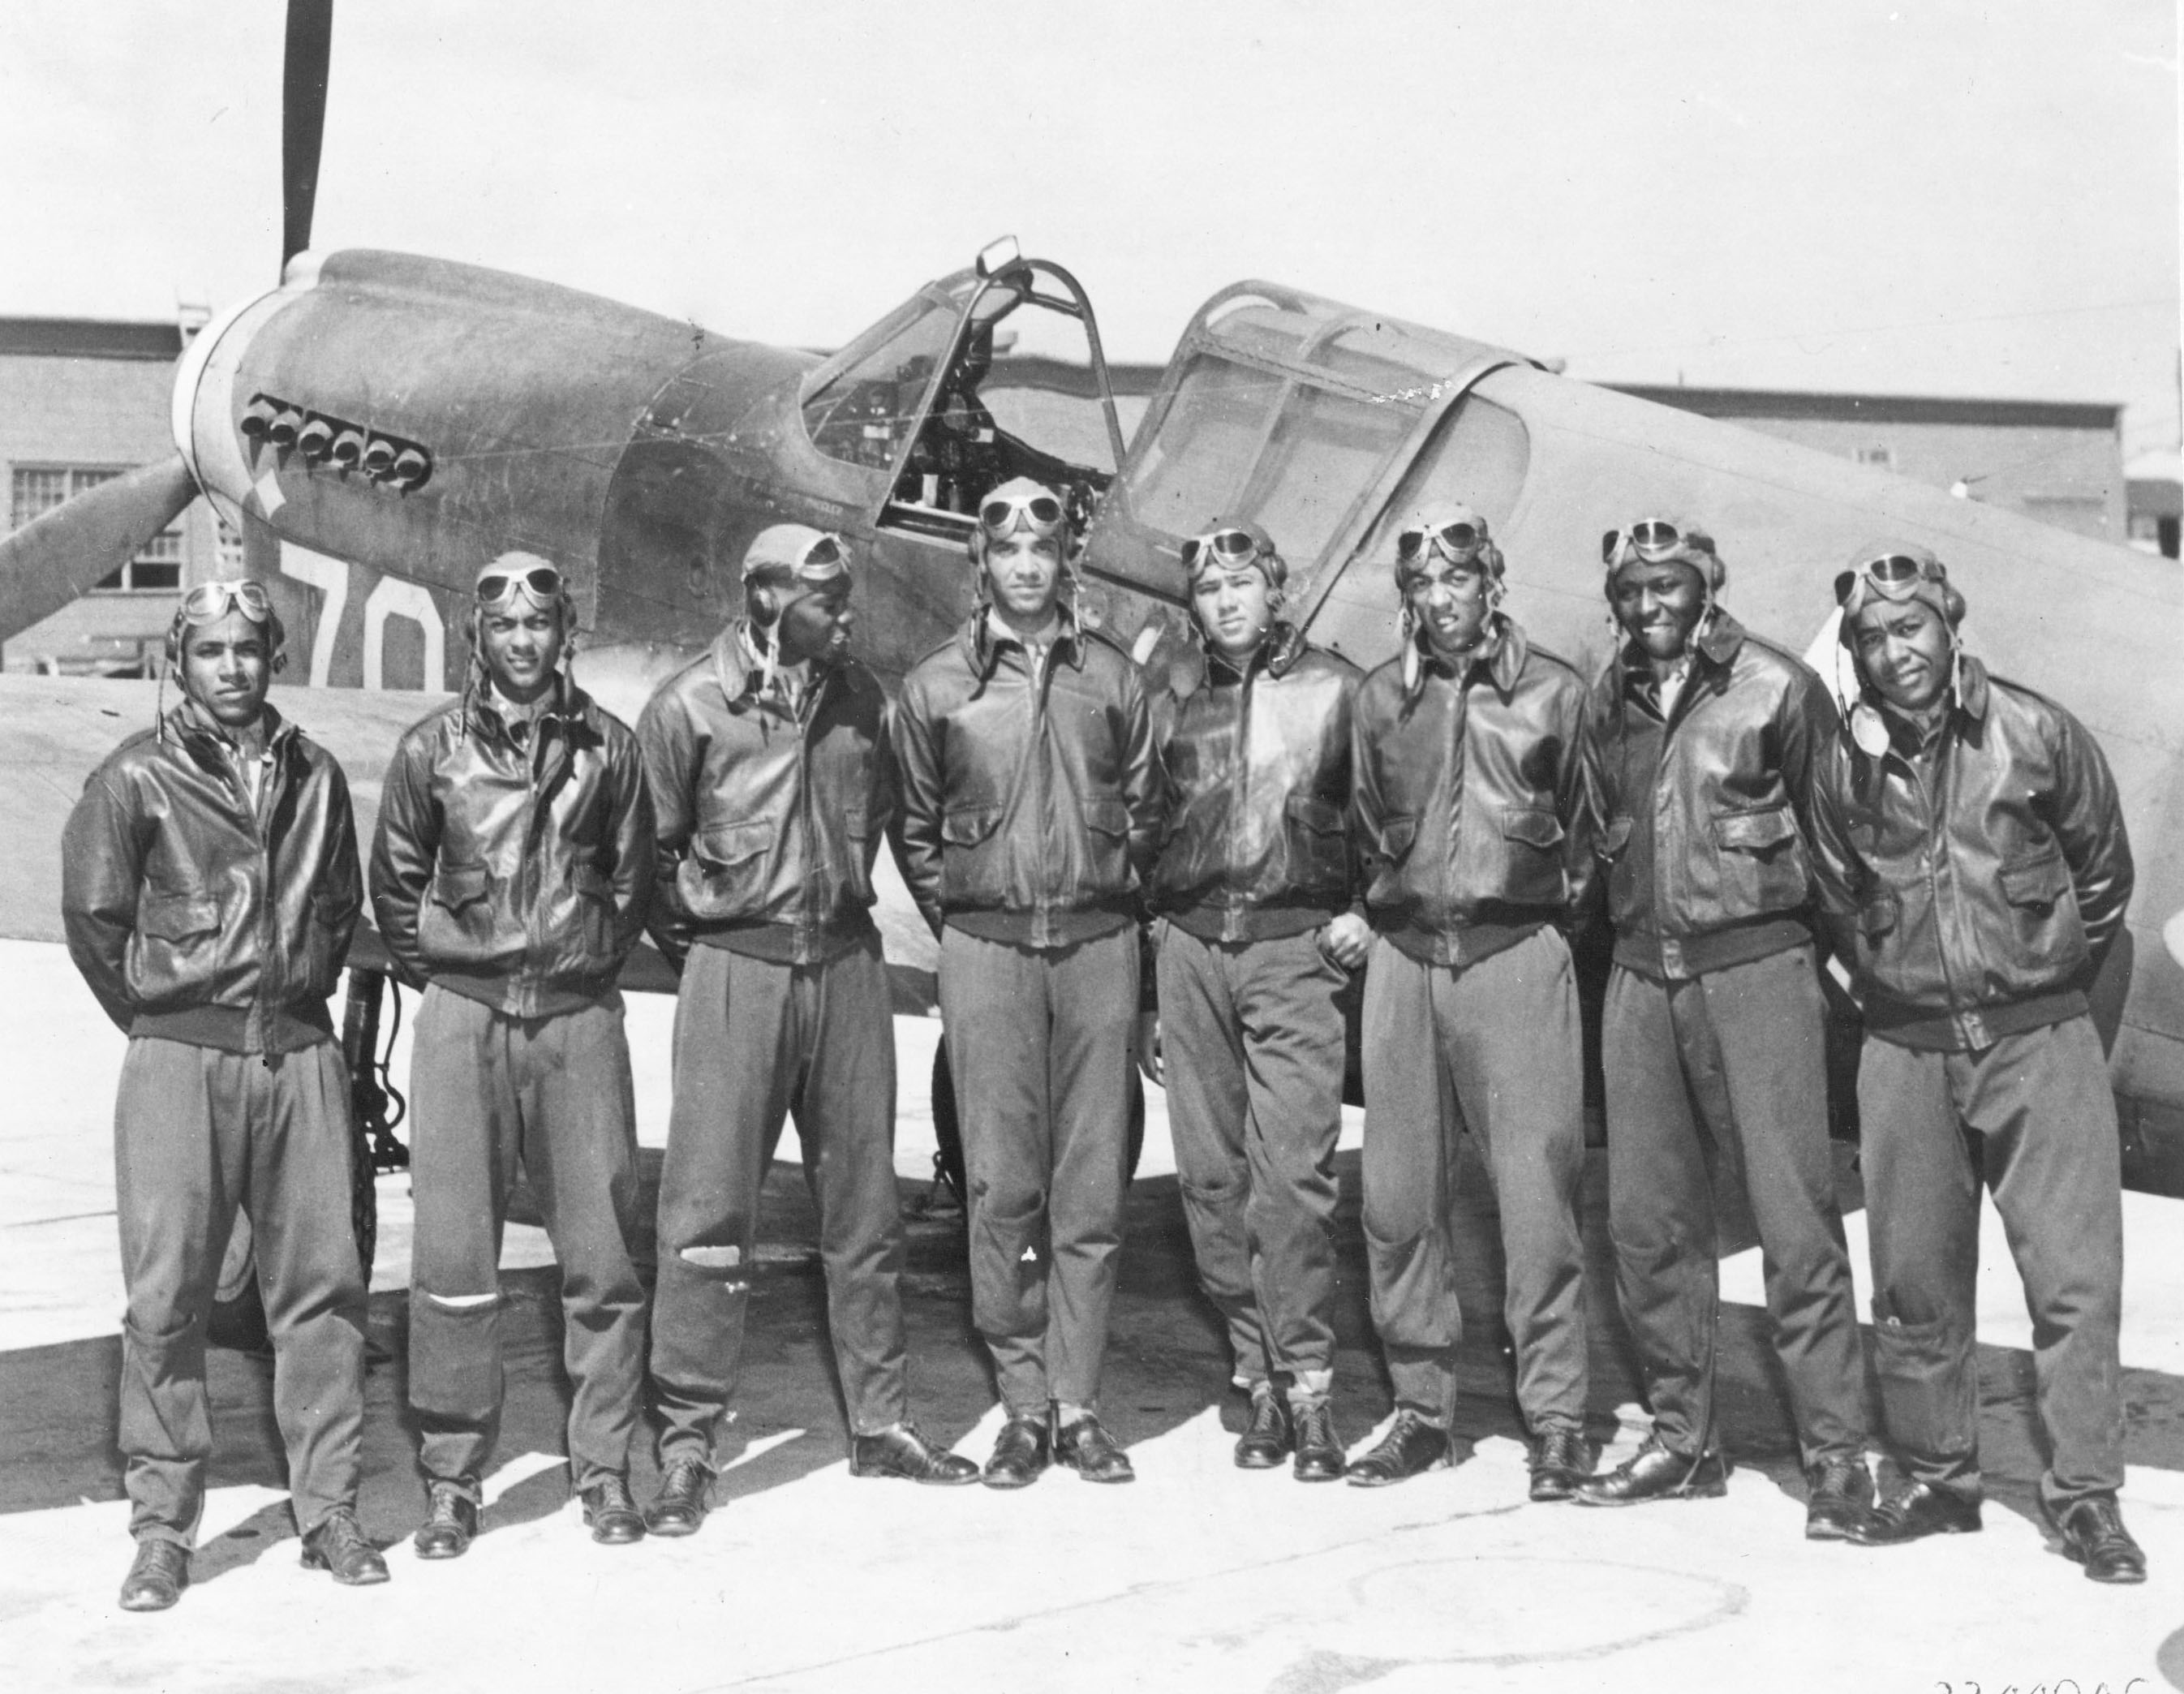 Tuskegee Airmen Pilot Listing This list of more than 1,000 gentlemen include the pilots -- America's First Black Aviators